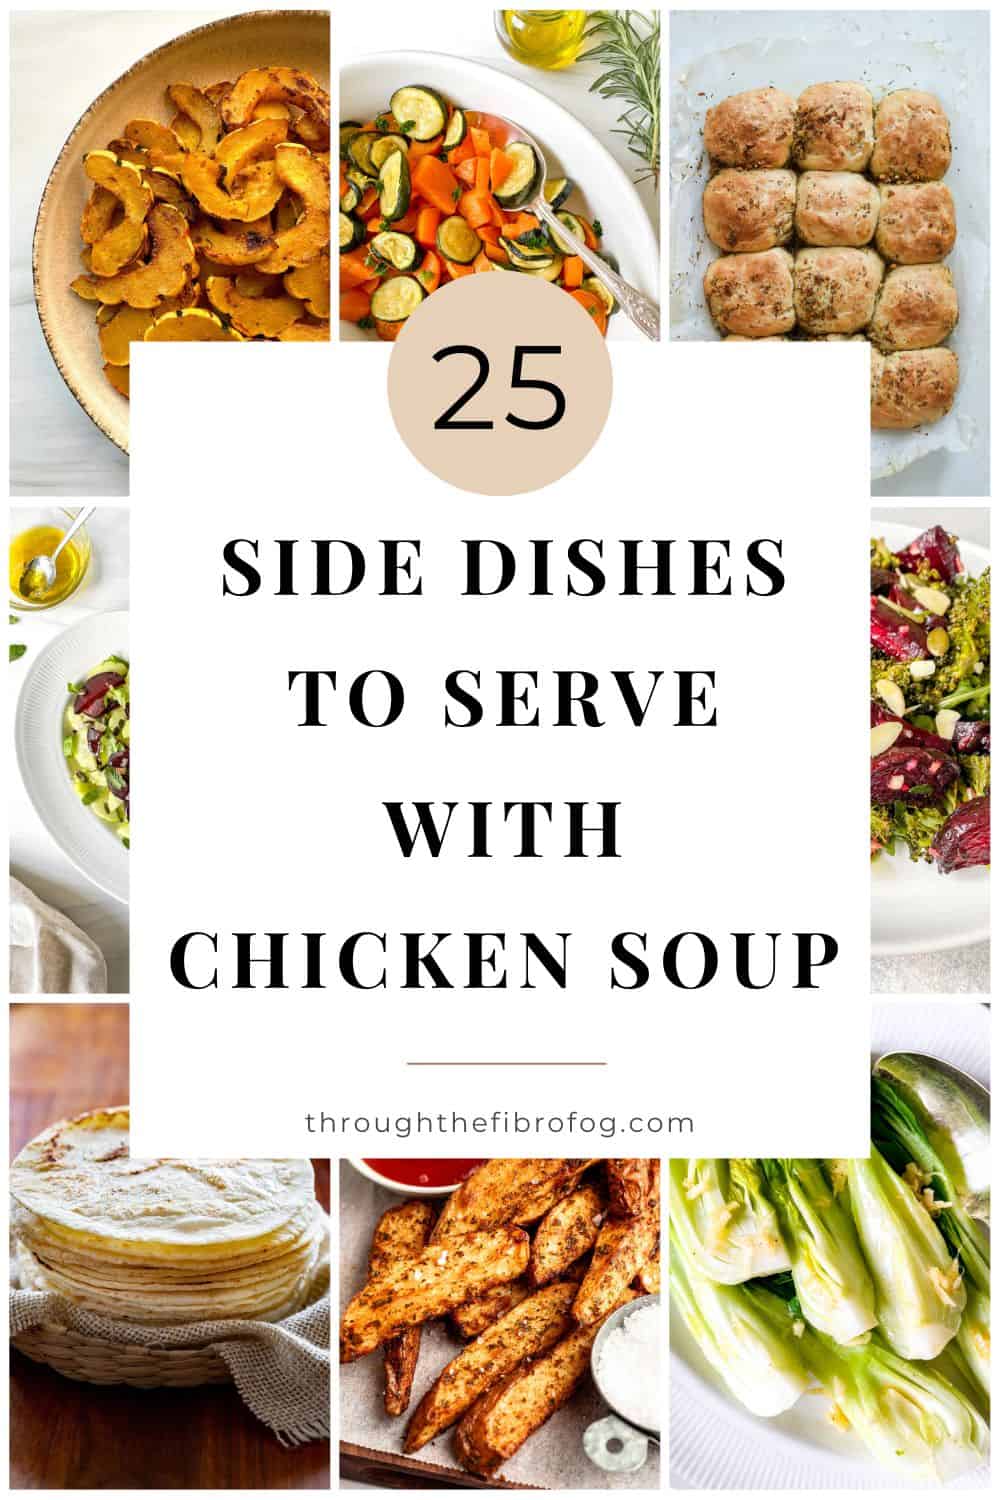 collage of side dishes including salads, breads and vegetables with text twenty-five sides to serve with chicken soup.